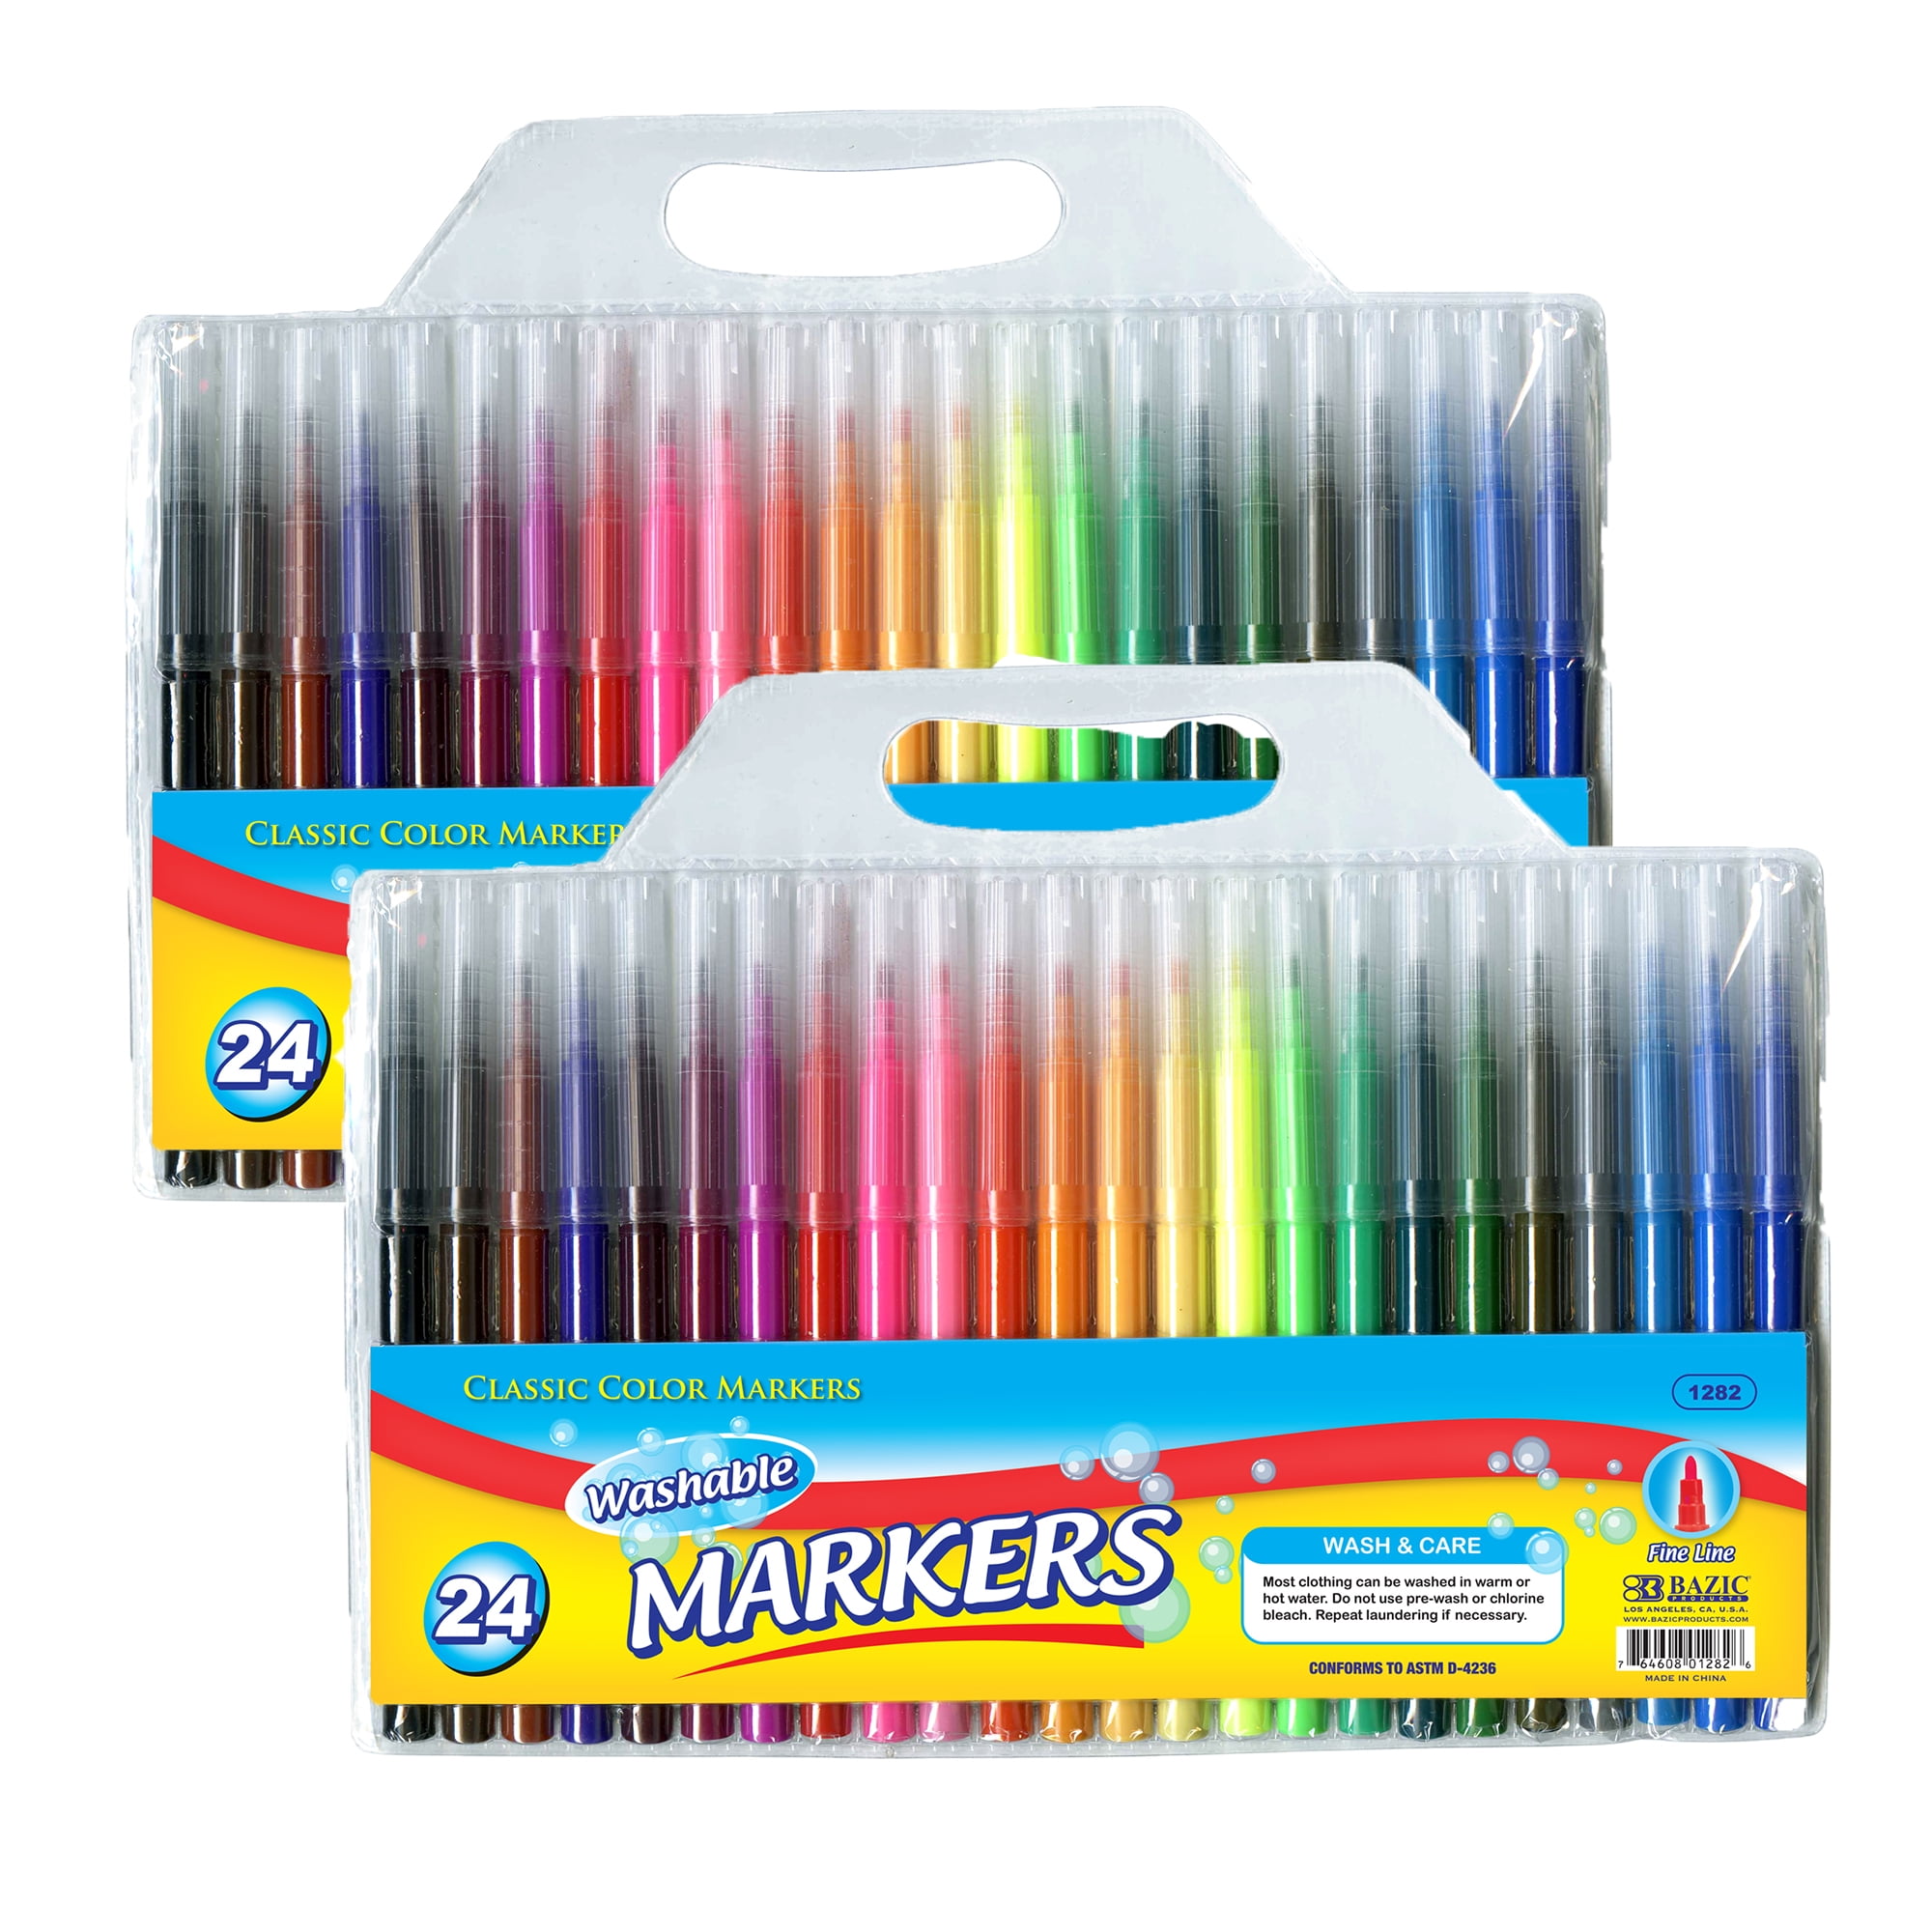 BAZIC 10 Color Washable Fruit Scented Markers, Chisel Tip Assorted